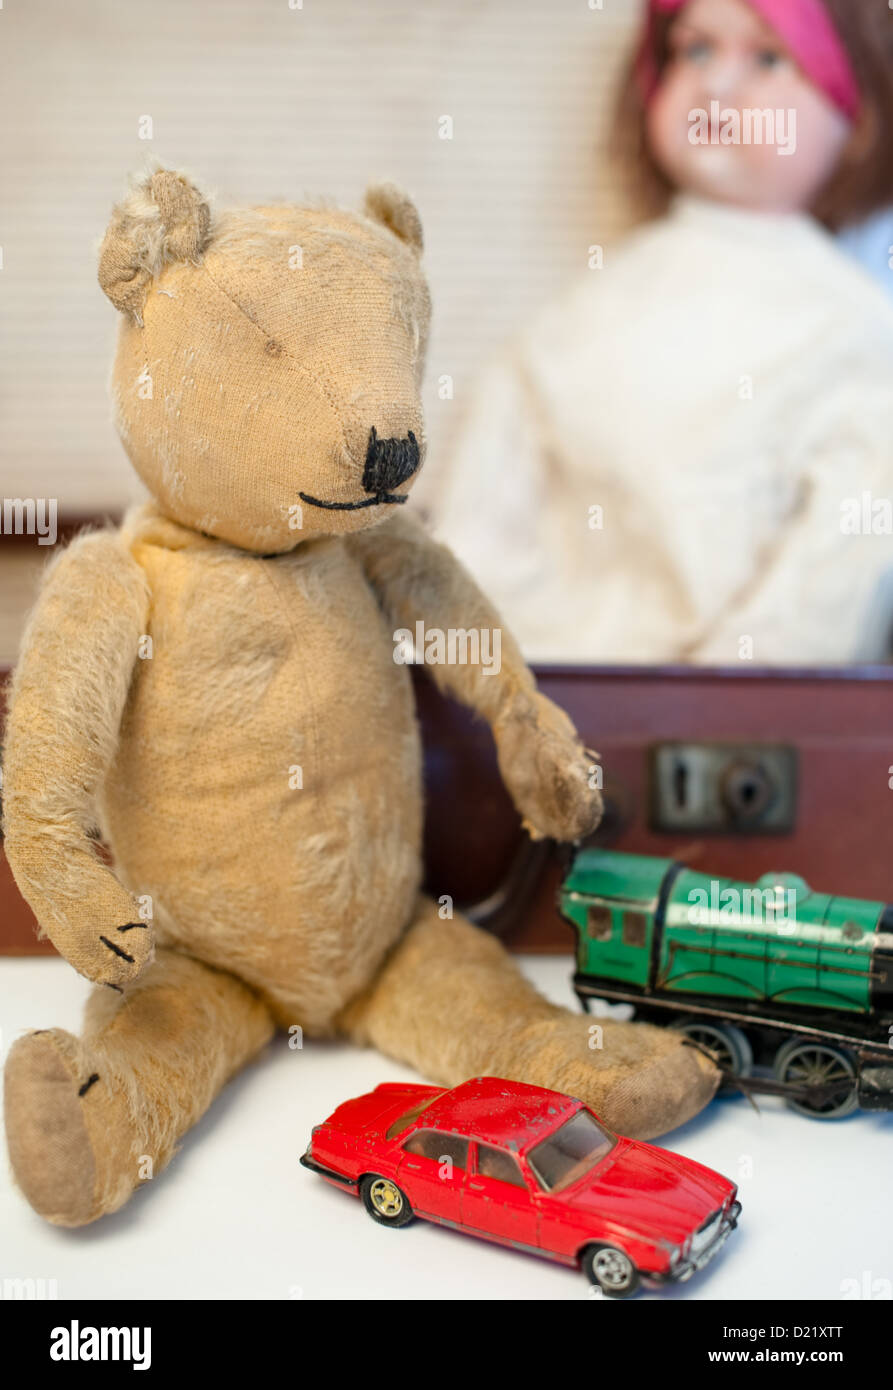 Old-fashioned well-loved vintage teddy bear, a red boys battered dinky car, green train engine and a Victorian china doll Stock Photo